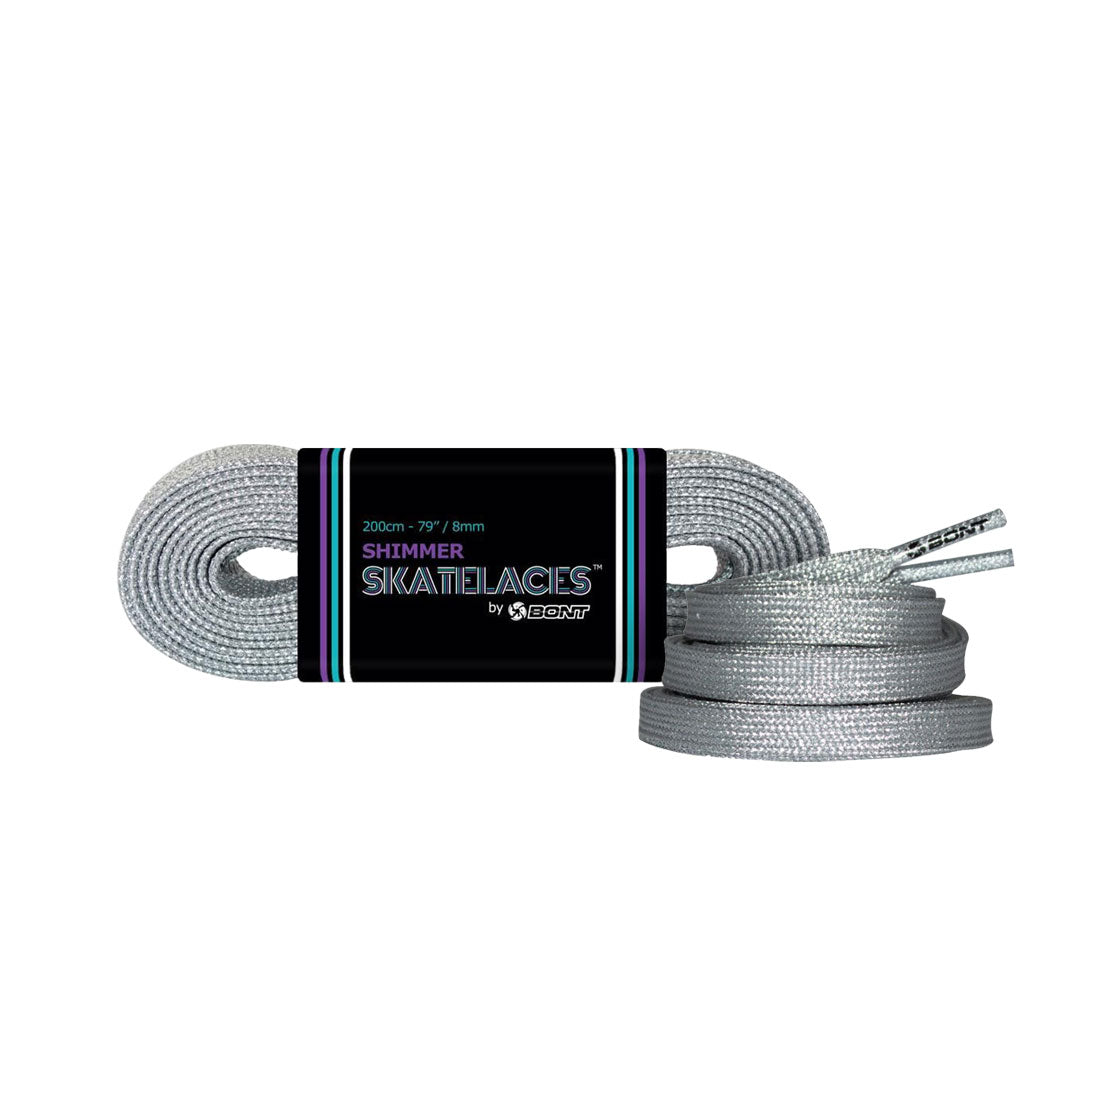 Bont Shimmer 8mm Laces - 200cm/79in Cyborg Silver Laces